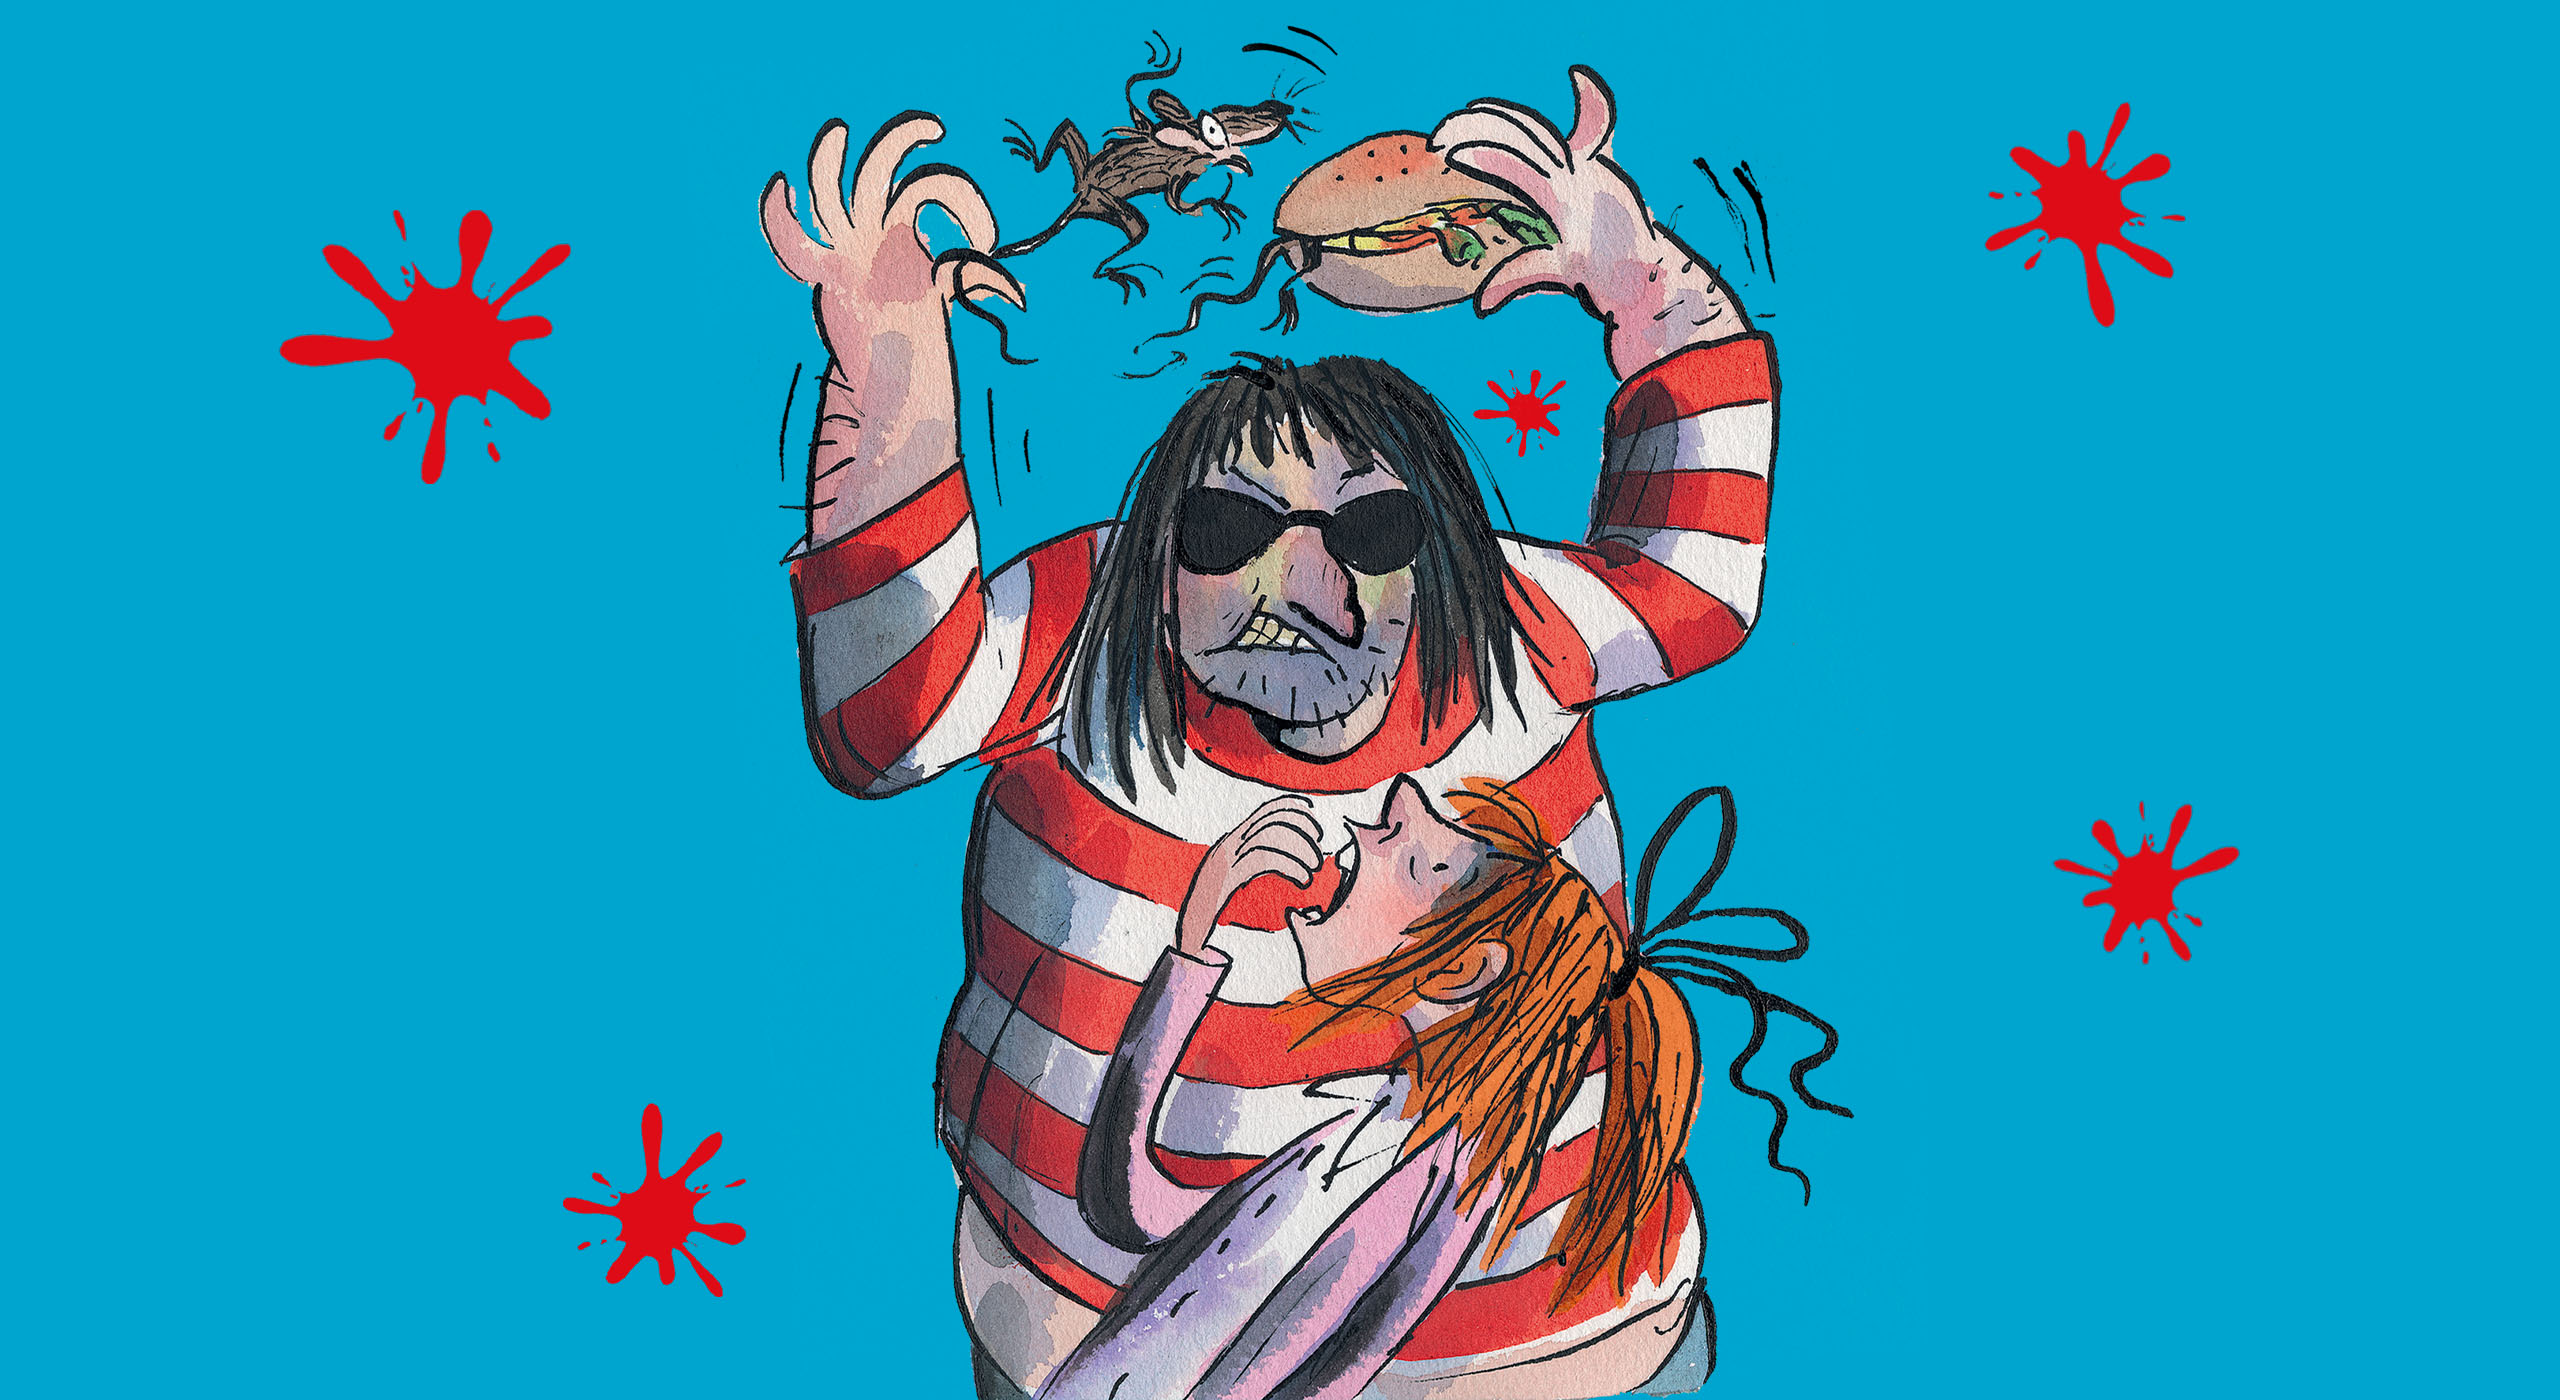 Illustration of a man with stripy clothing, sunglasses and long hair holding a rat and a burger above his head. A little girl with a red haired ponytail stares up at him and gasps